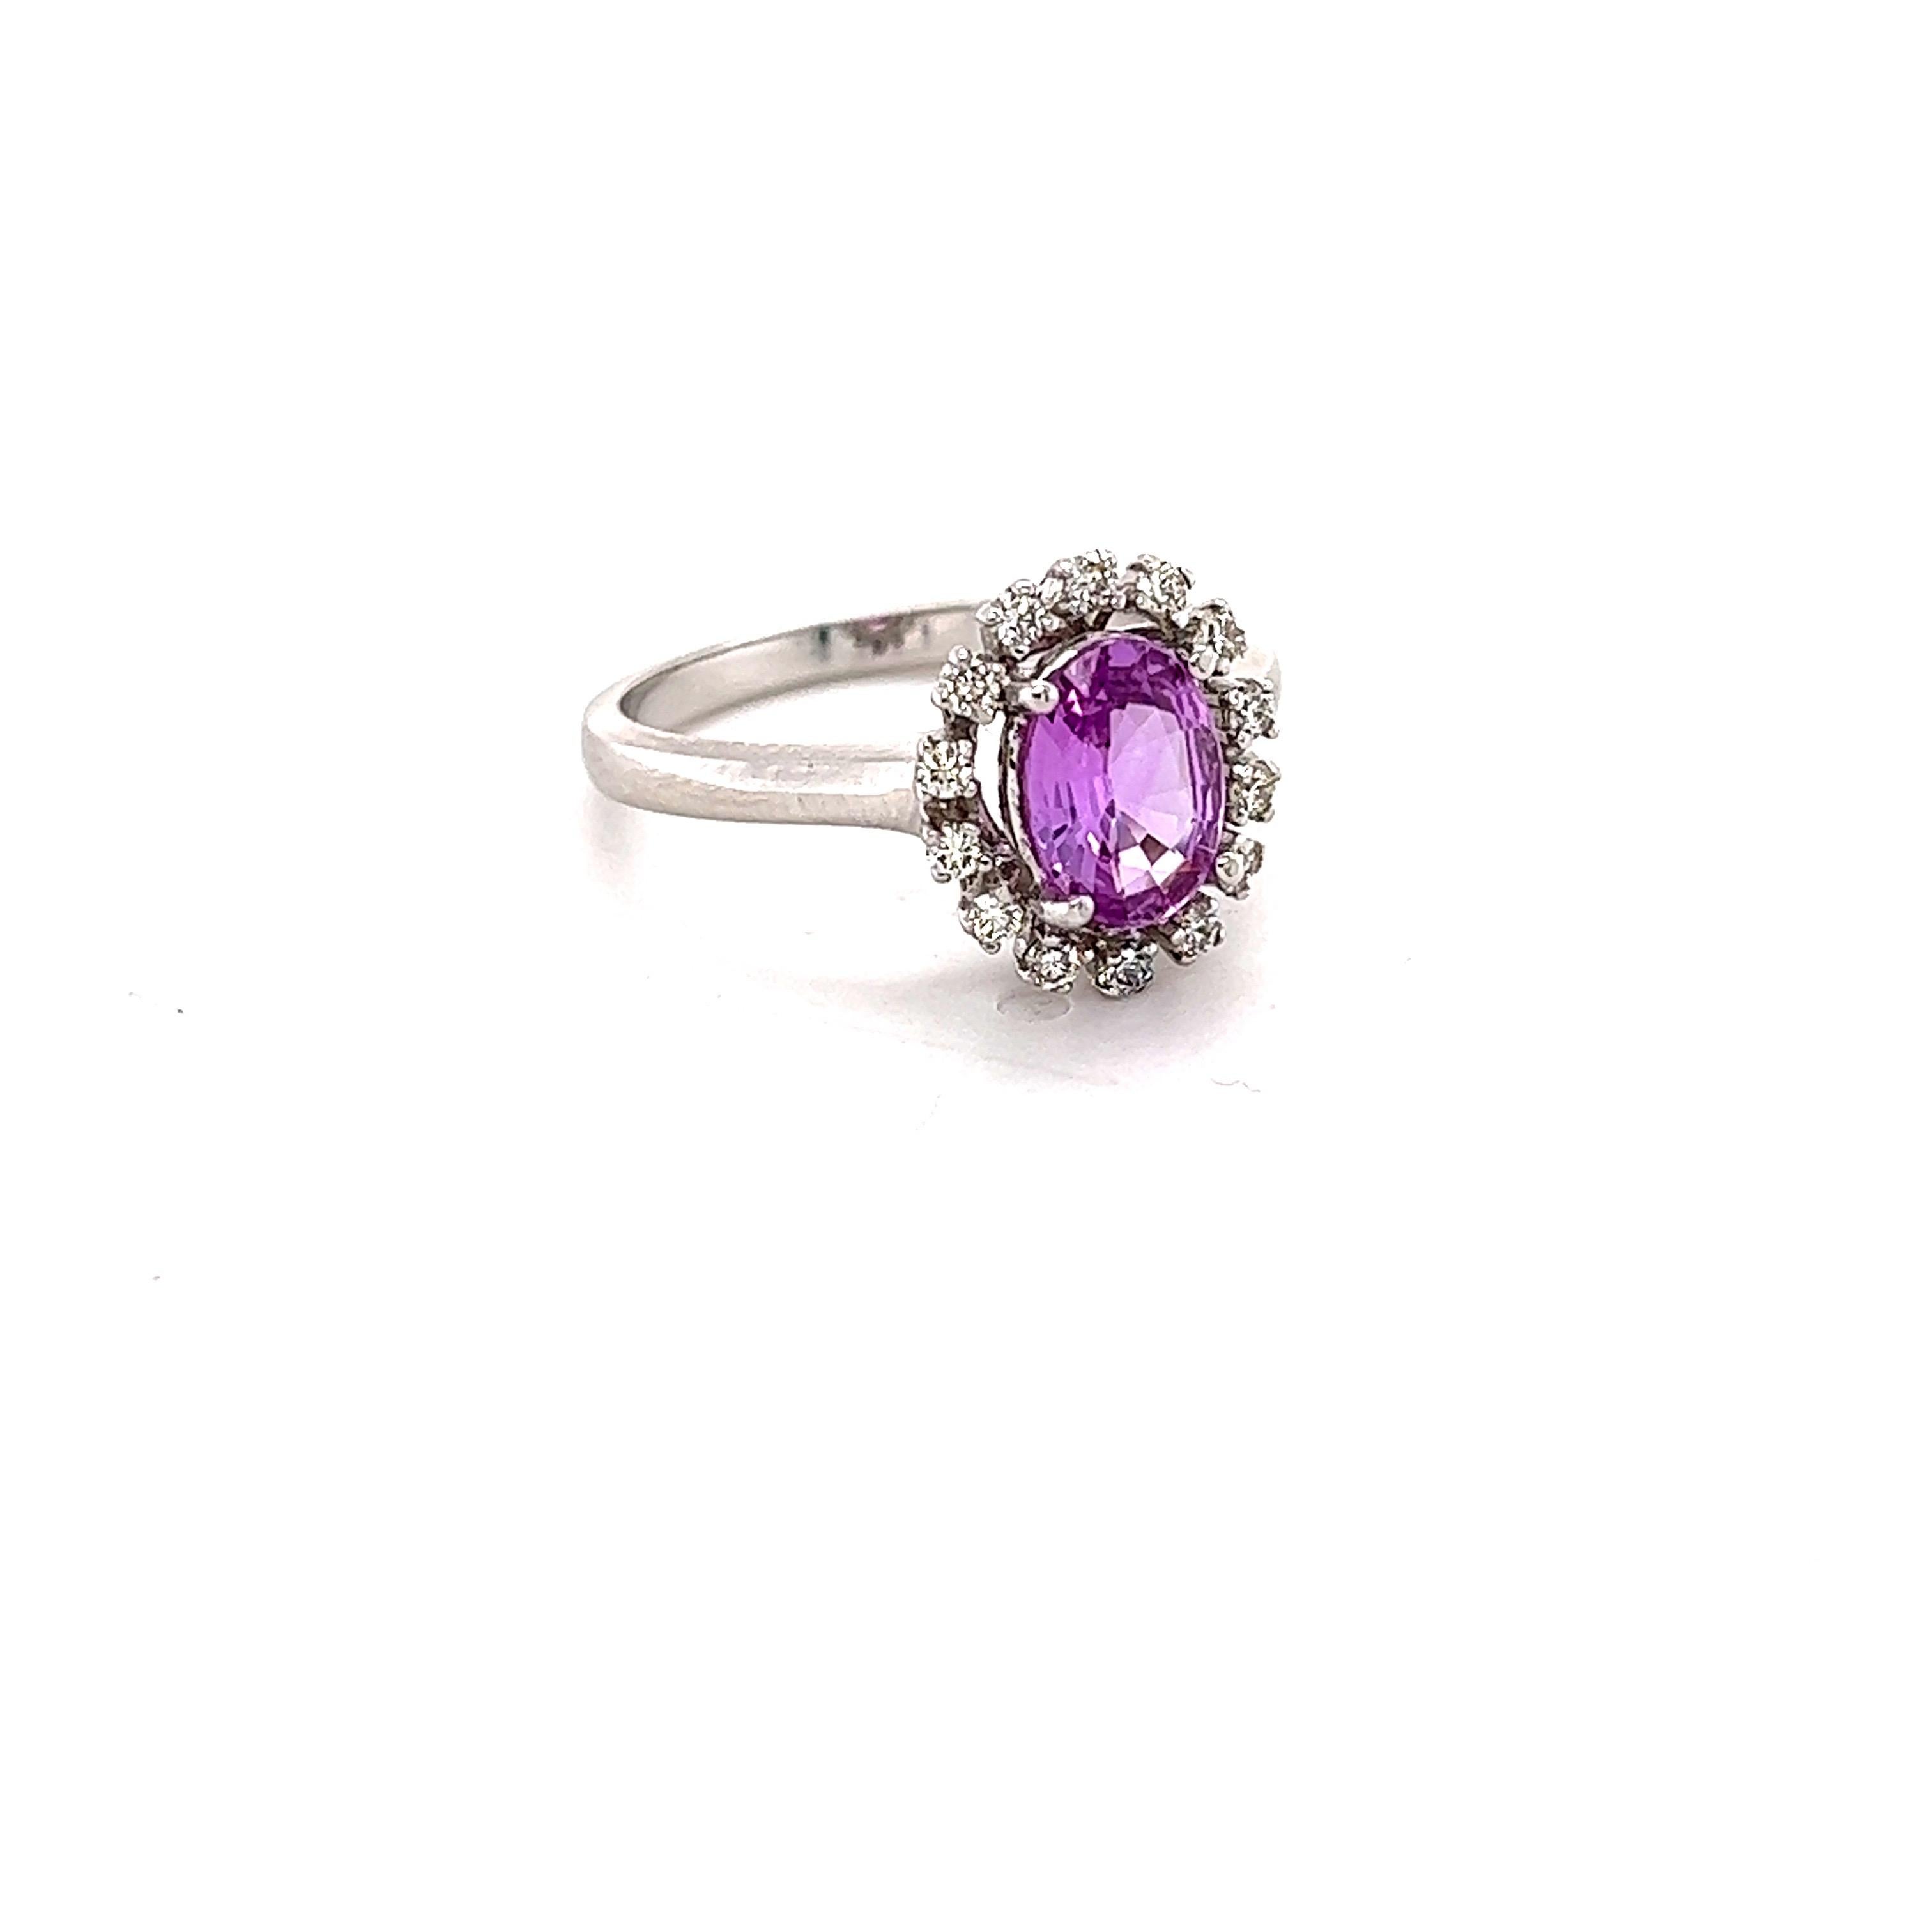 This beautiful ring has a Natural Oval Cut Pink Sapphire that weights 1.09 Carats. The pink sapphire measures at approximately 8 mm x 6 mm. 

The ring is embellished with 14 Round Cut Diamonds that weigh 0.21 Carats with a clarity and color of VS/H.